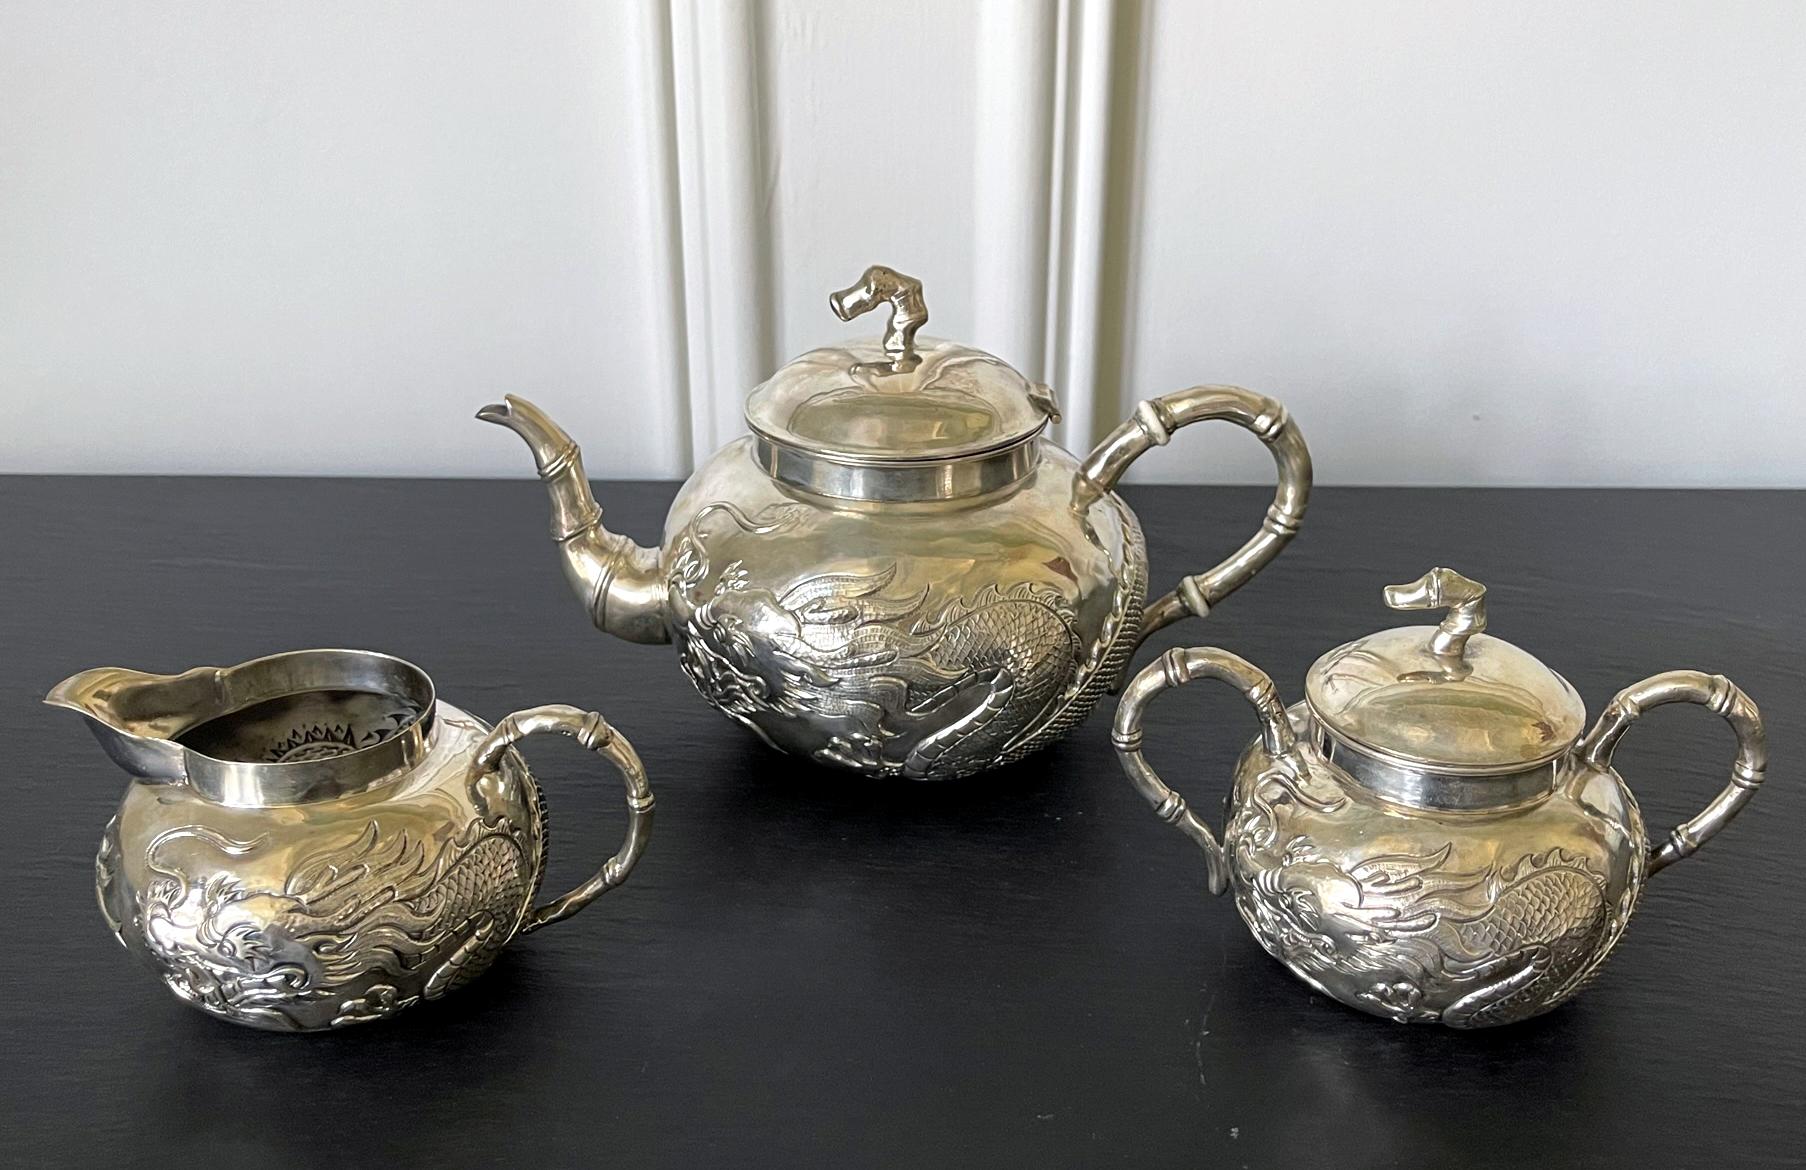 Early Chinese Export Silver Tea Service by Cutshing In Good Condition For Sale In Atlanta, GA